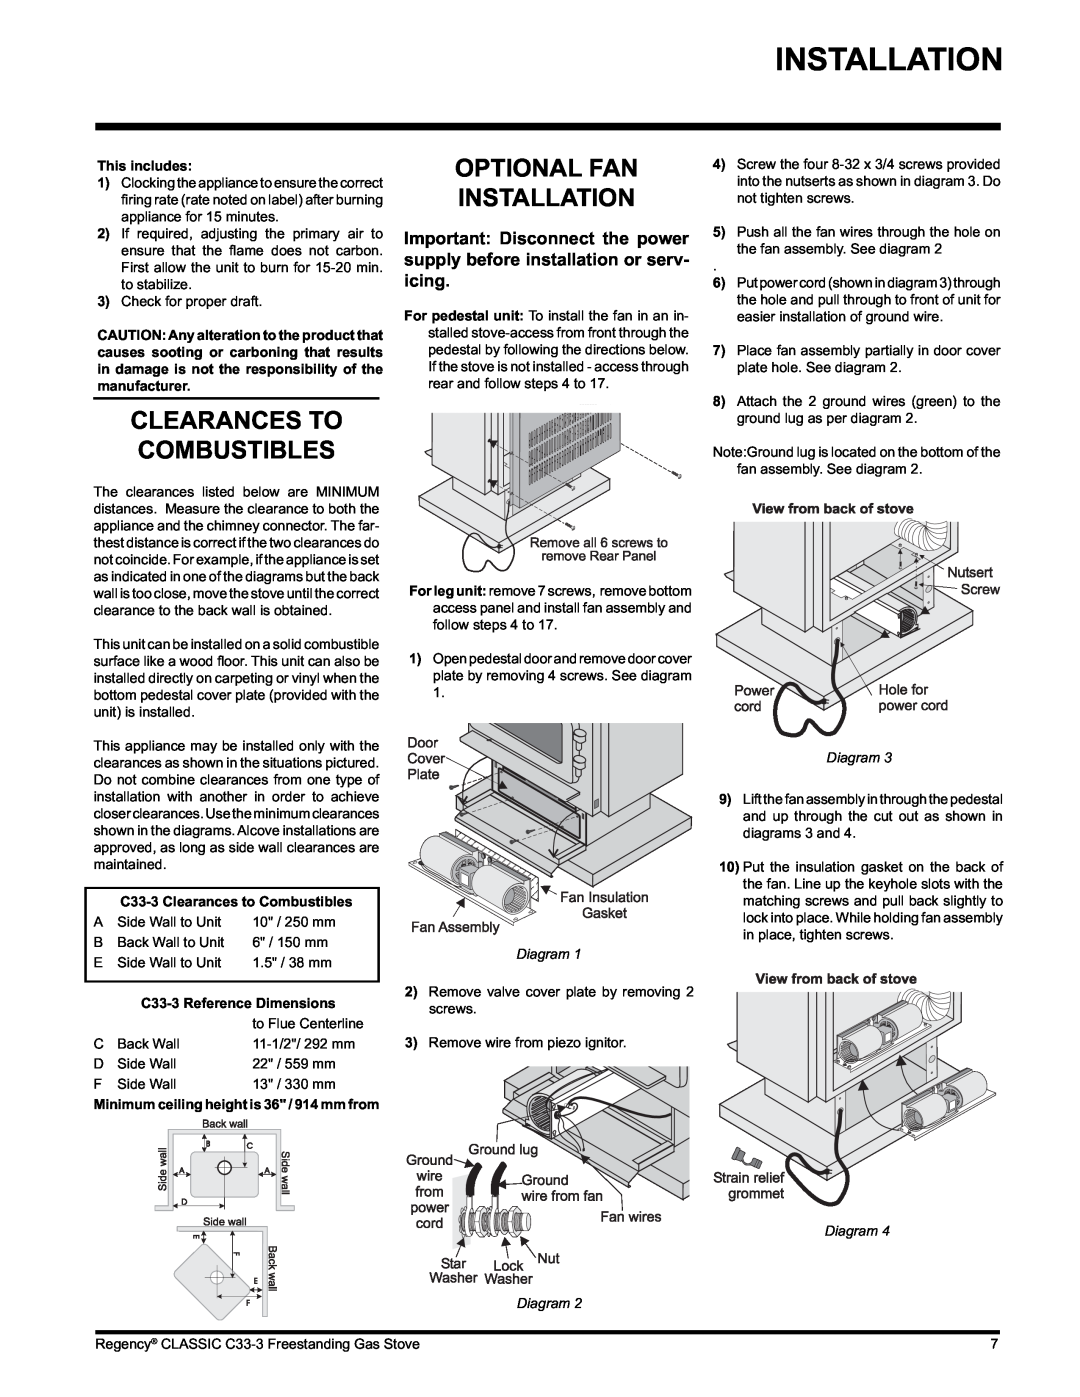 Regency C33-NG3, C33-LP3 installation manual Clearances To Combustibles, Optional Fan Installation, Diagram Diagram 